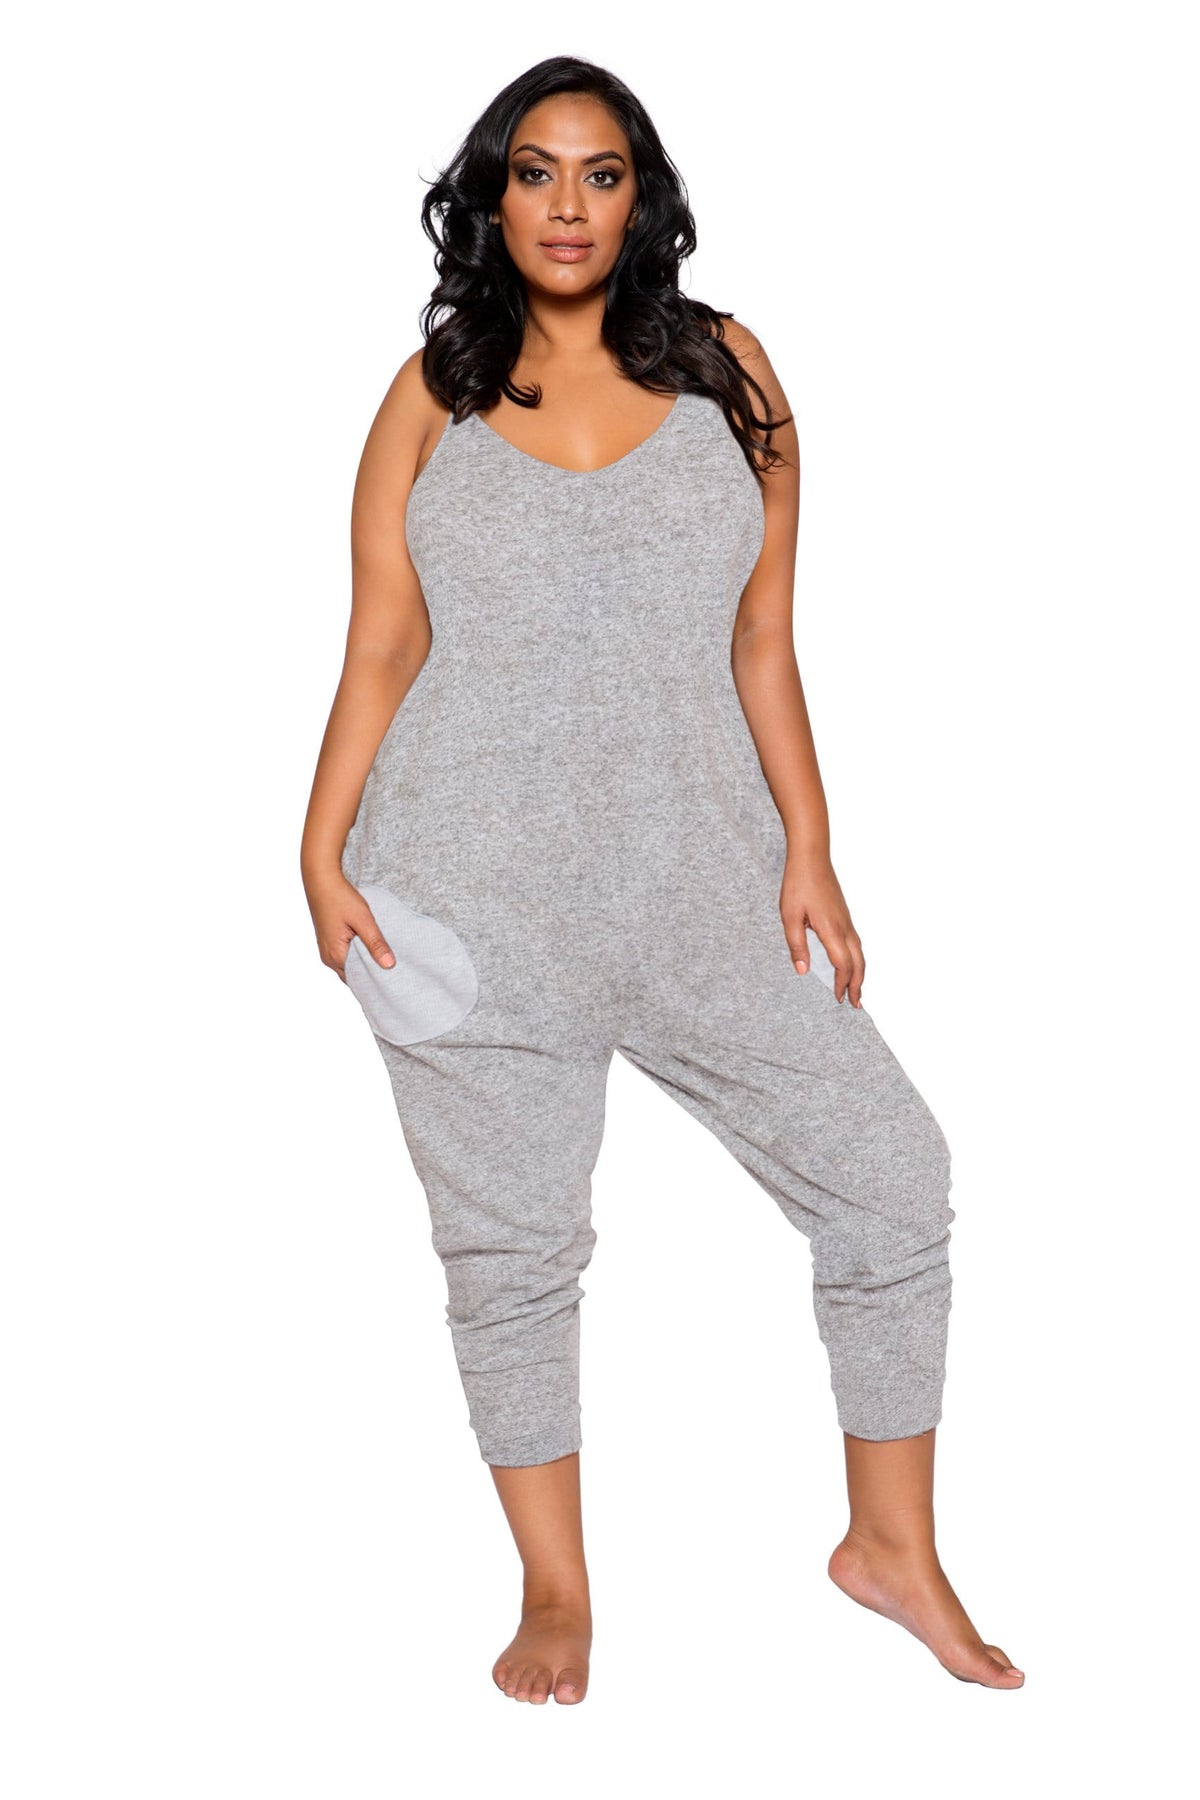 Roma XL/XXL / Grey Grey Plus Size Pajama Jumpsuit w/ Pockets (Black also available) SHC-LI294-GREY-XL/XXL Black Grey Plus Size Pajama Jumpsuit w/ Pockets | ROMA COSTUME LI294 Apparel &amp; Accessories &gt; Clothing &gt; One Pieces &gt; Jumpsuits &amp; Rompers